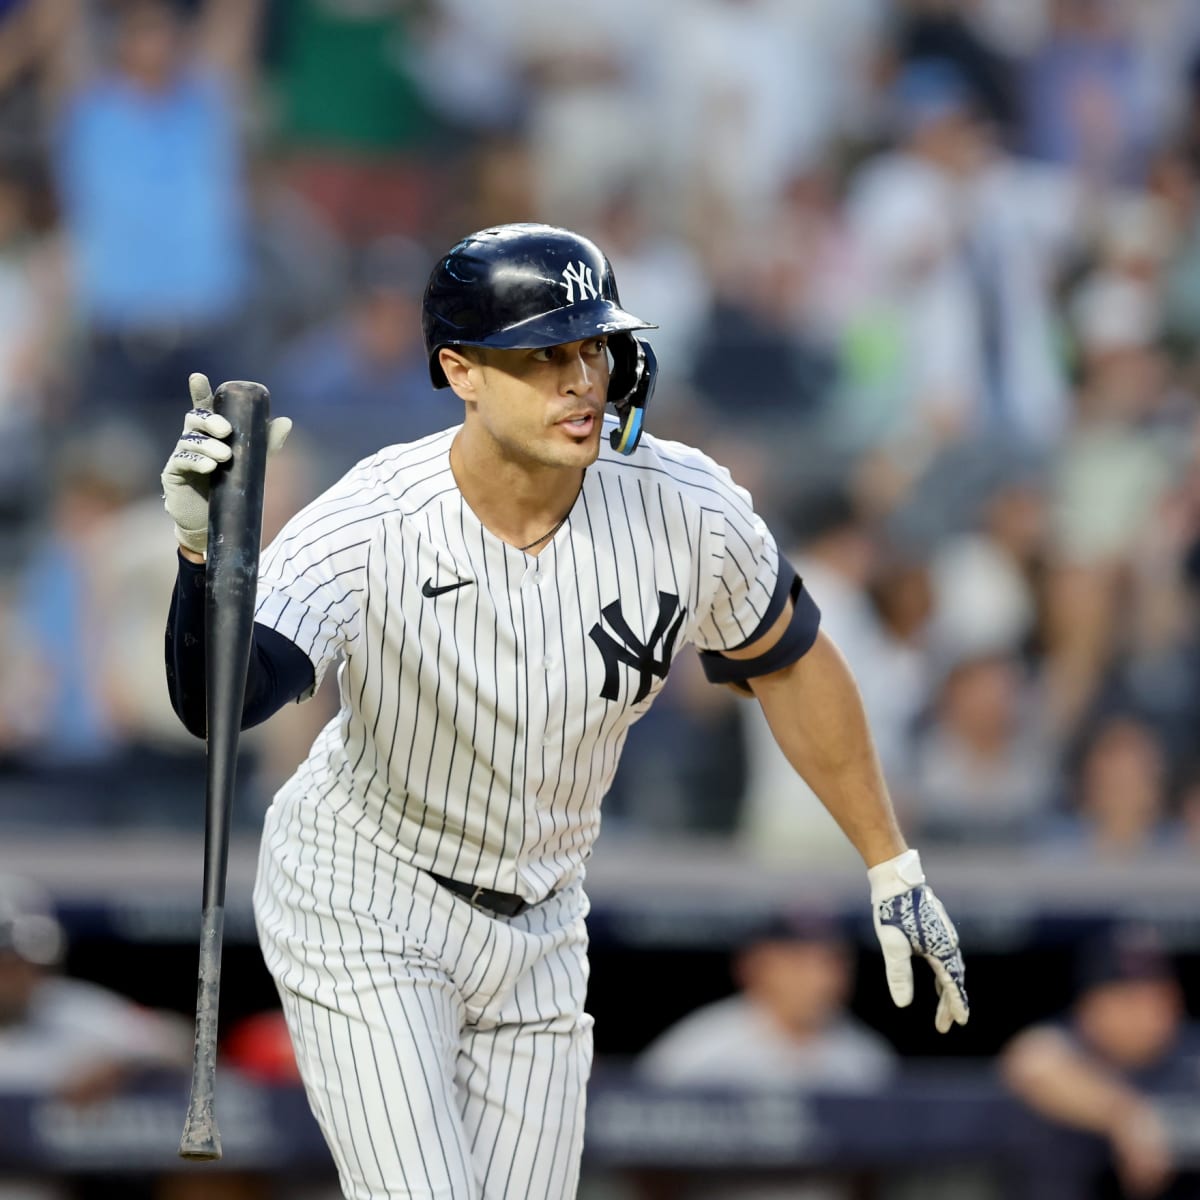 Yankees OF Giancarlo Stanton Currently Scheduled To Rehab In